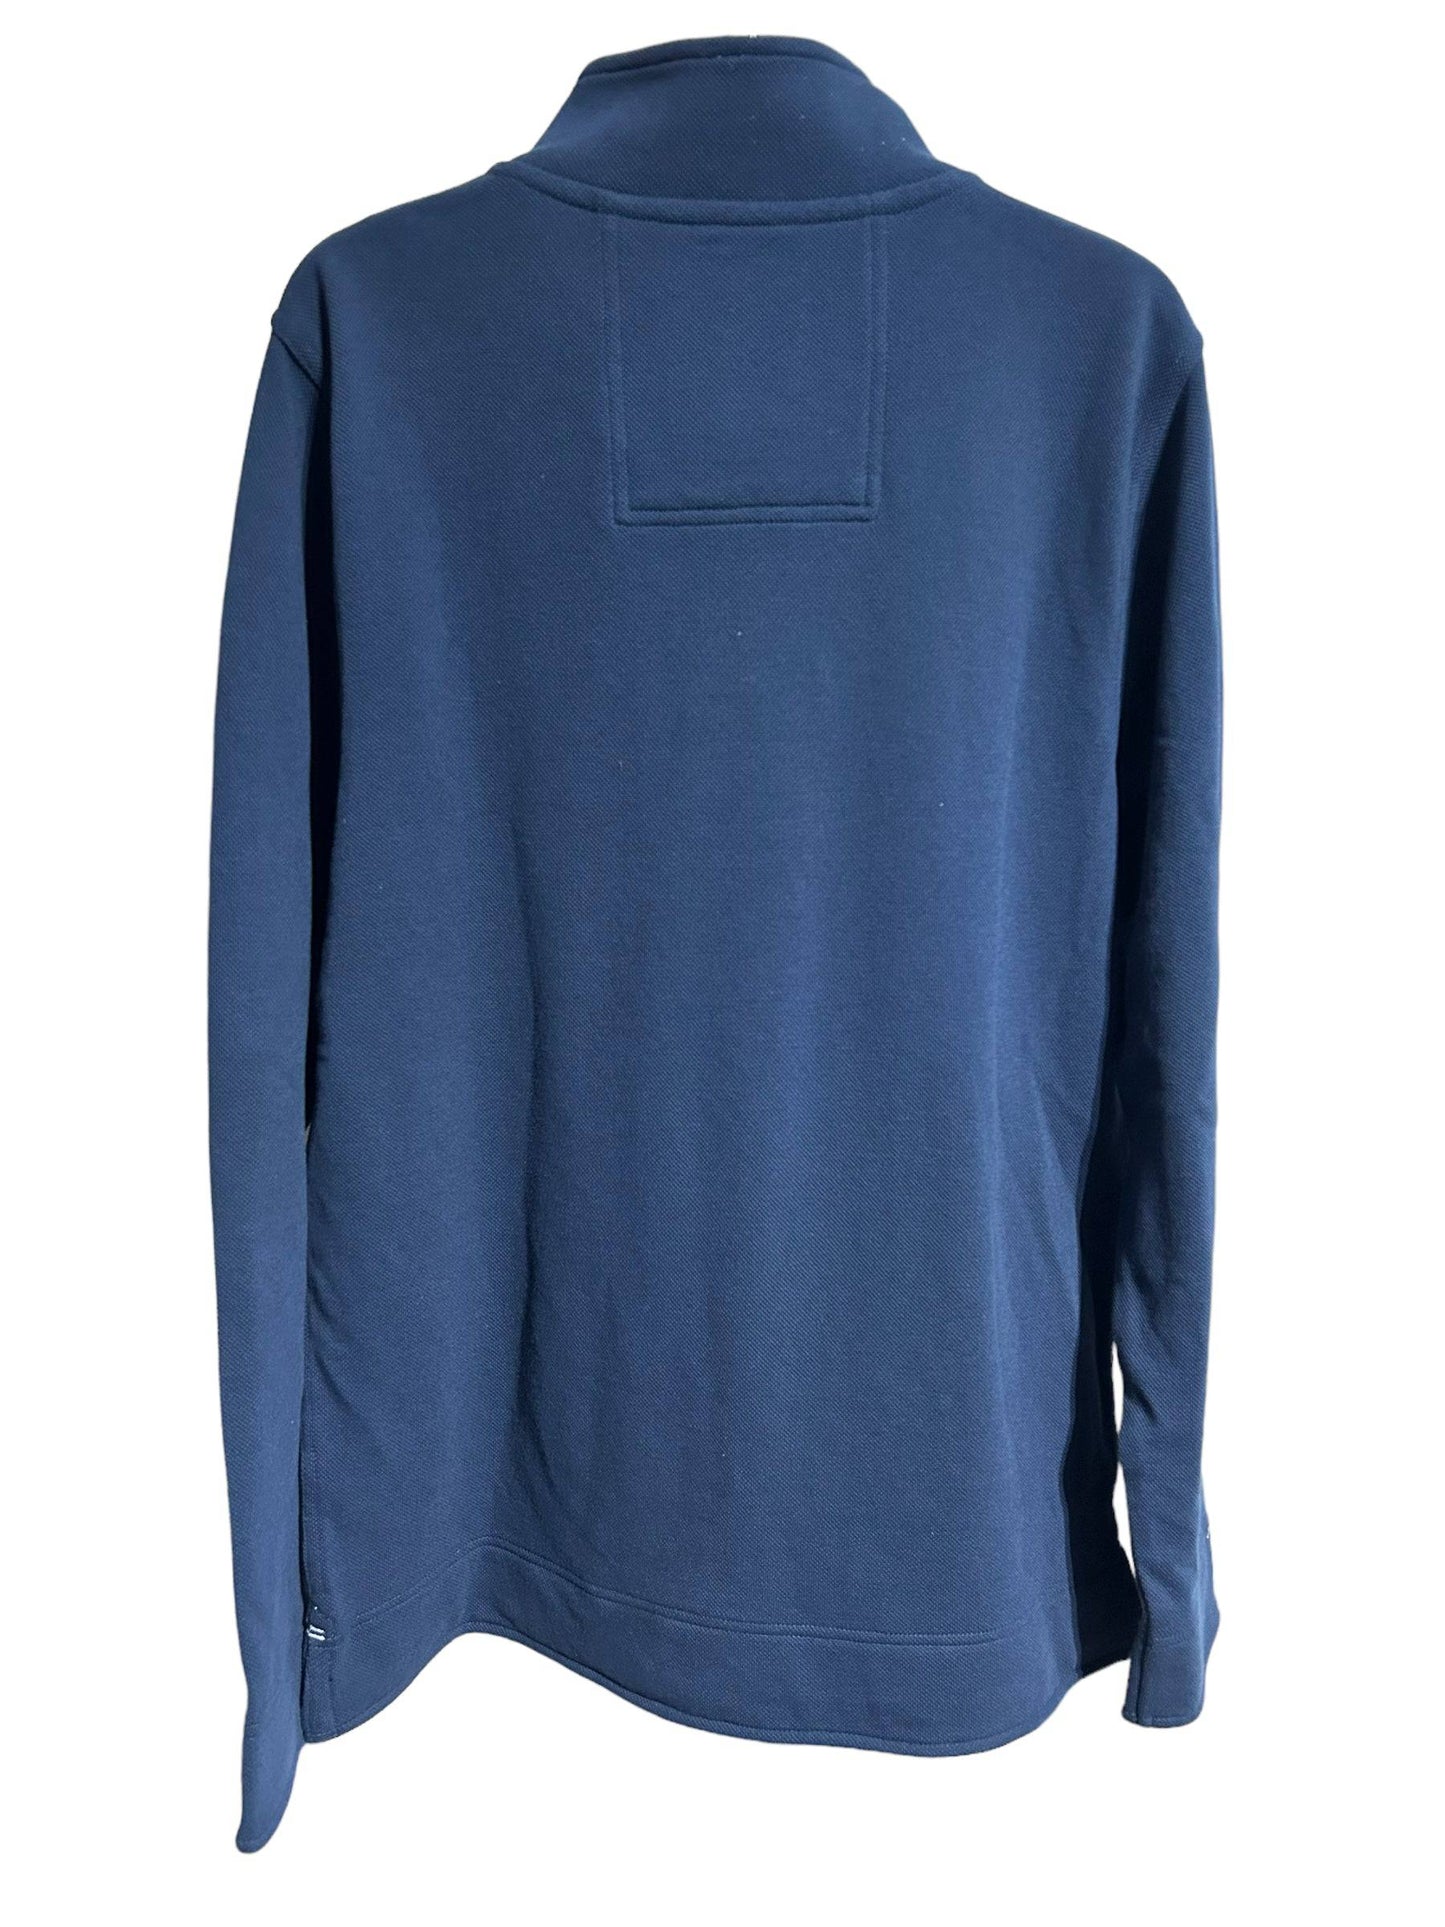 Crew Clothing Company Pique Solid Sweater Top - Recurring.Life